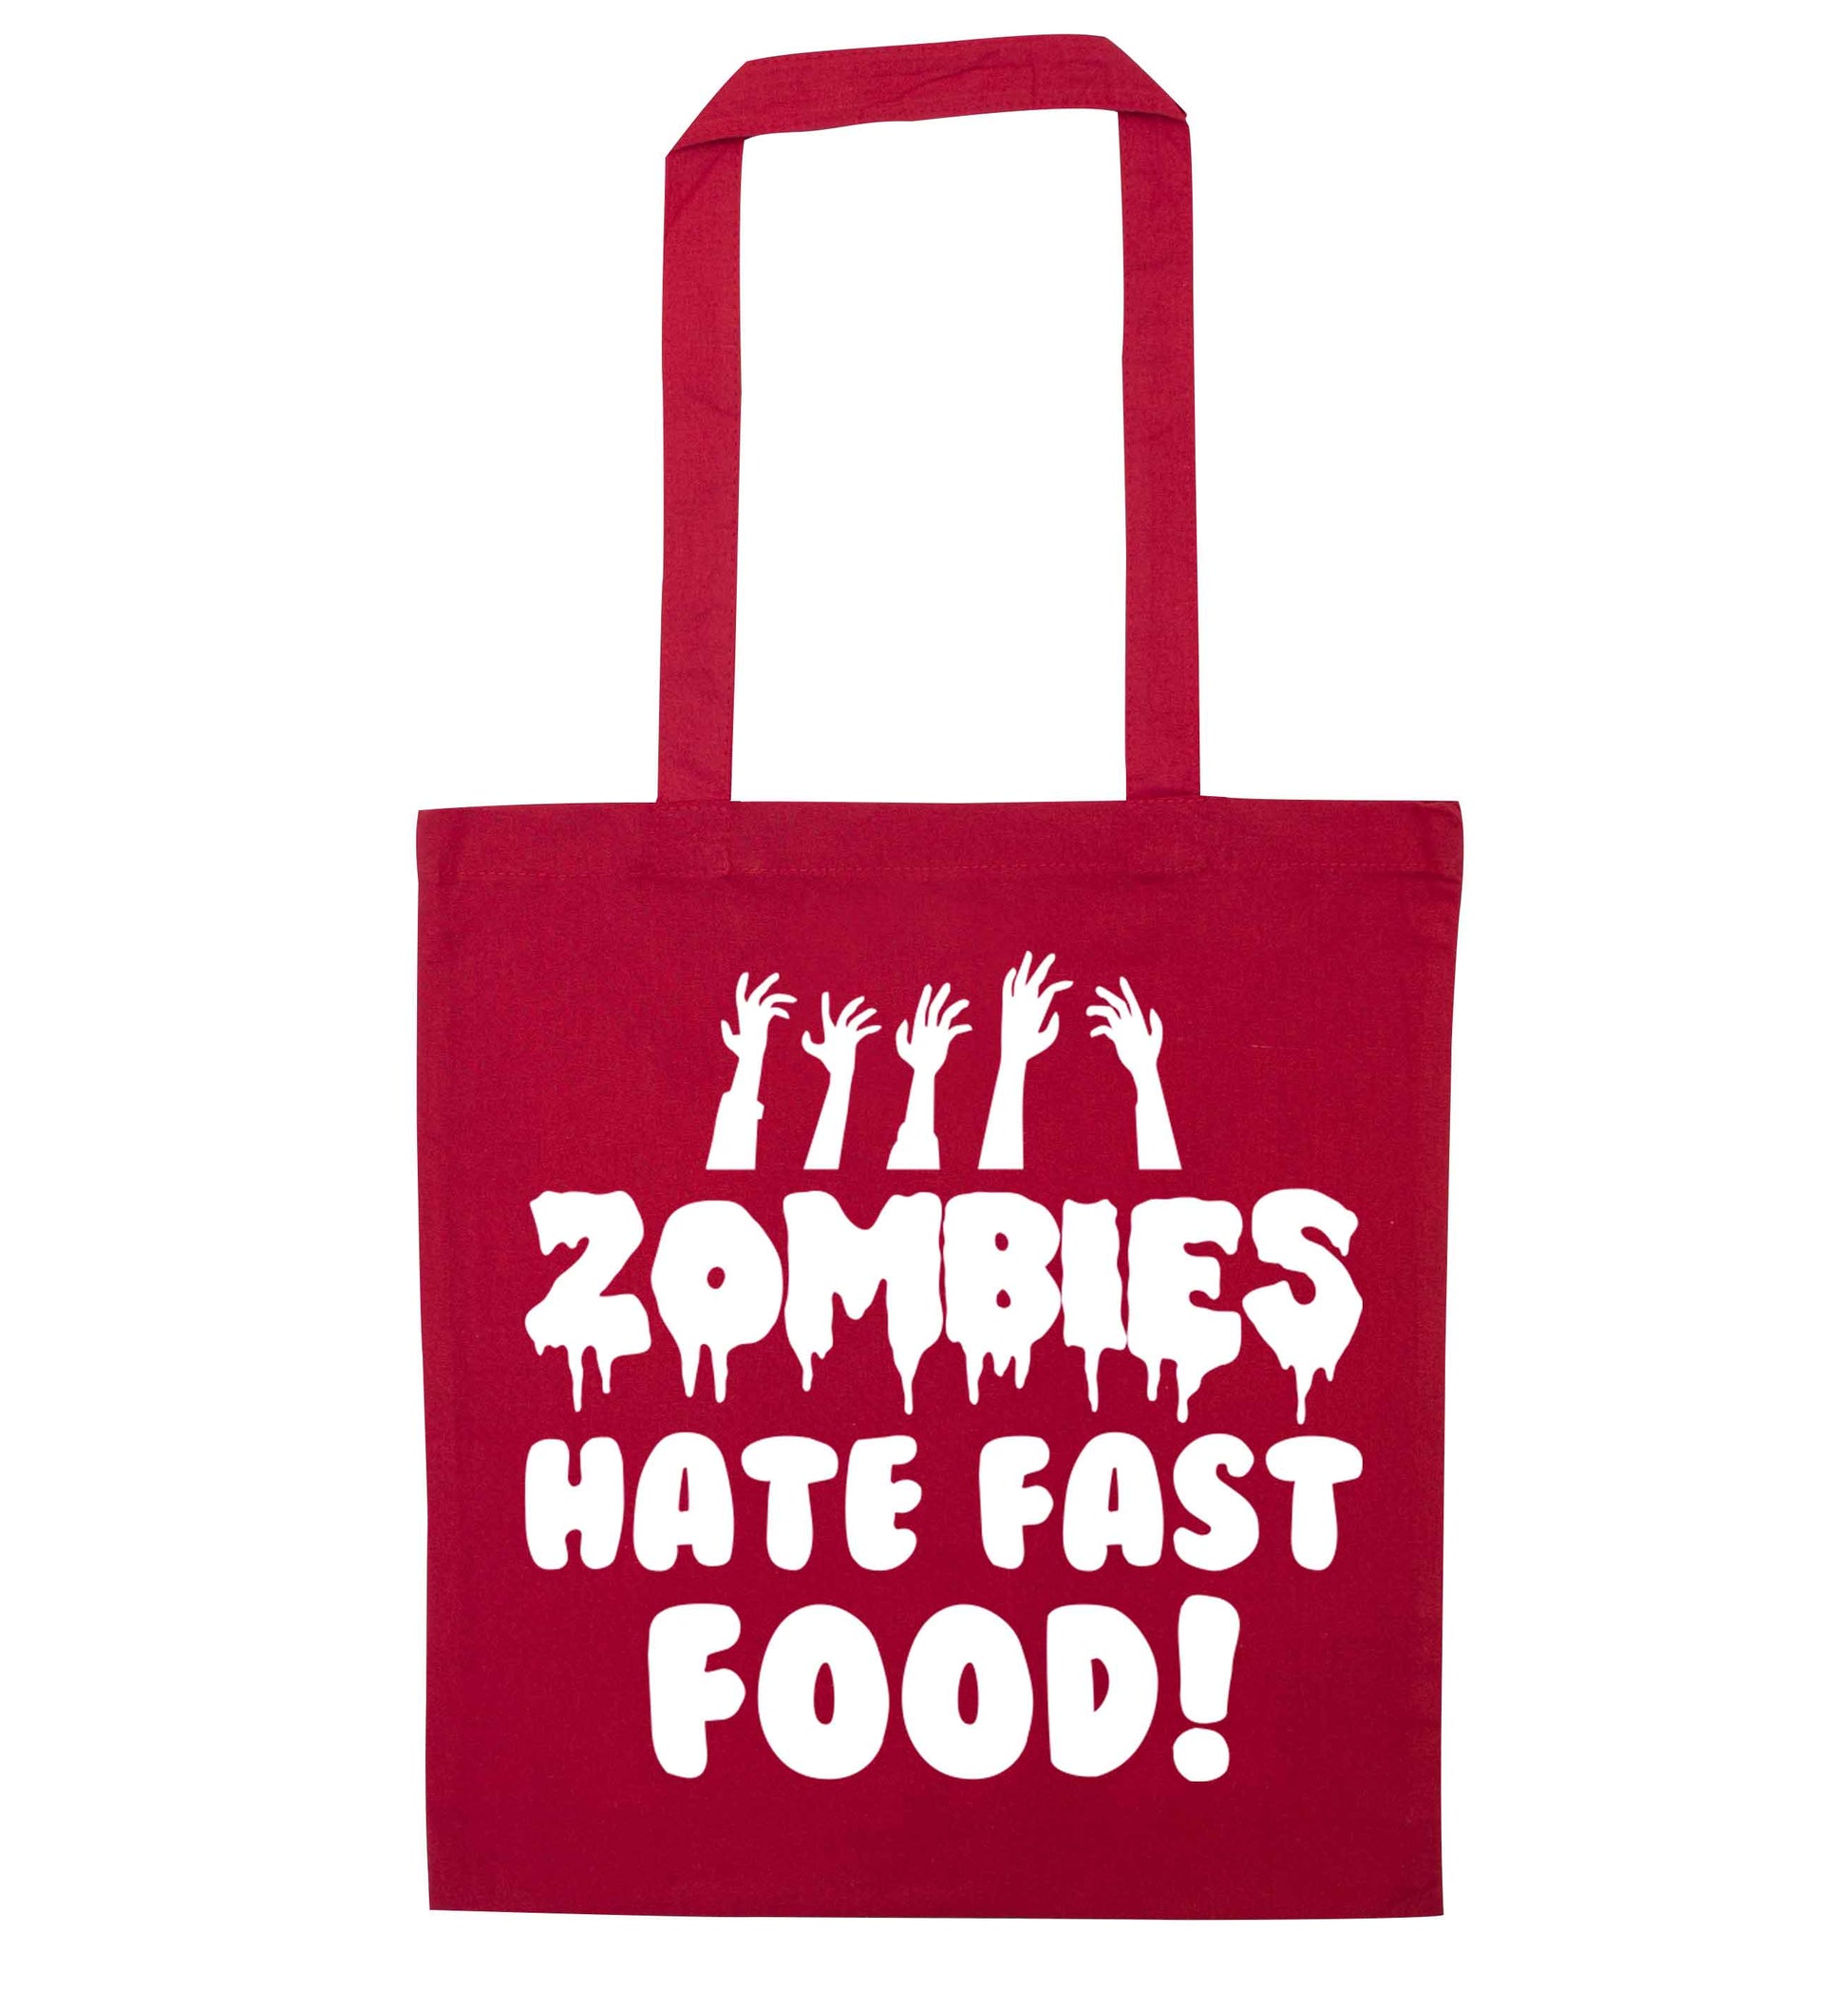 Zombies hate fast food red tote bag